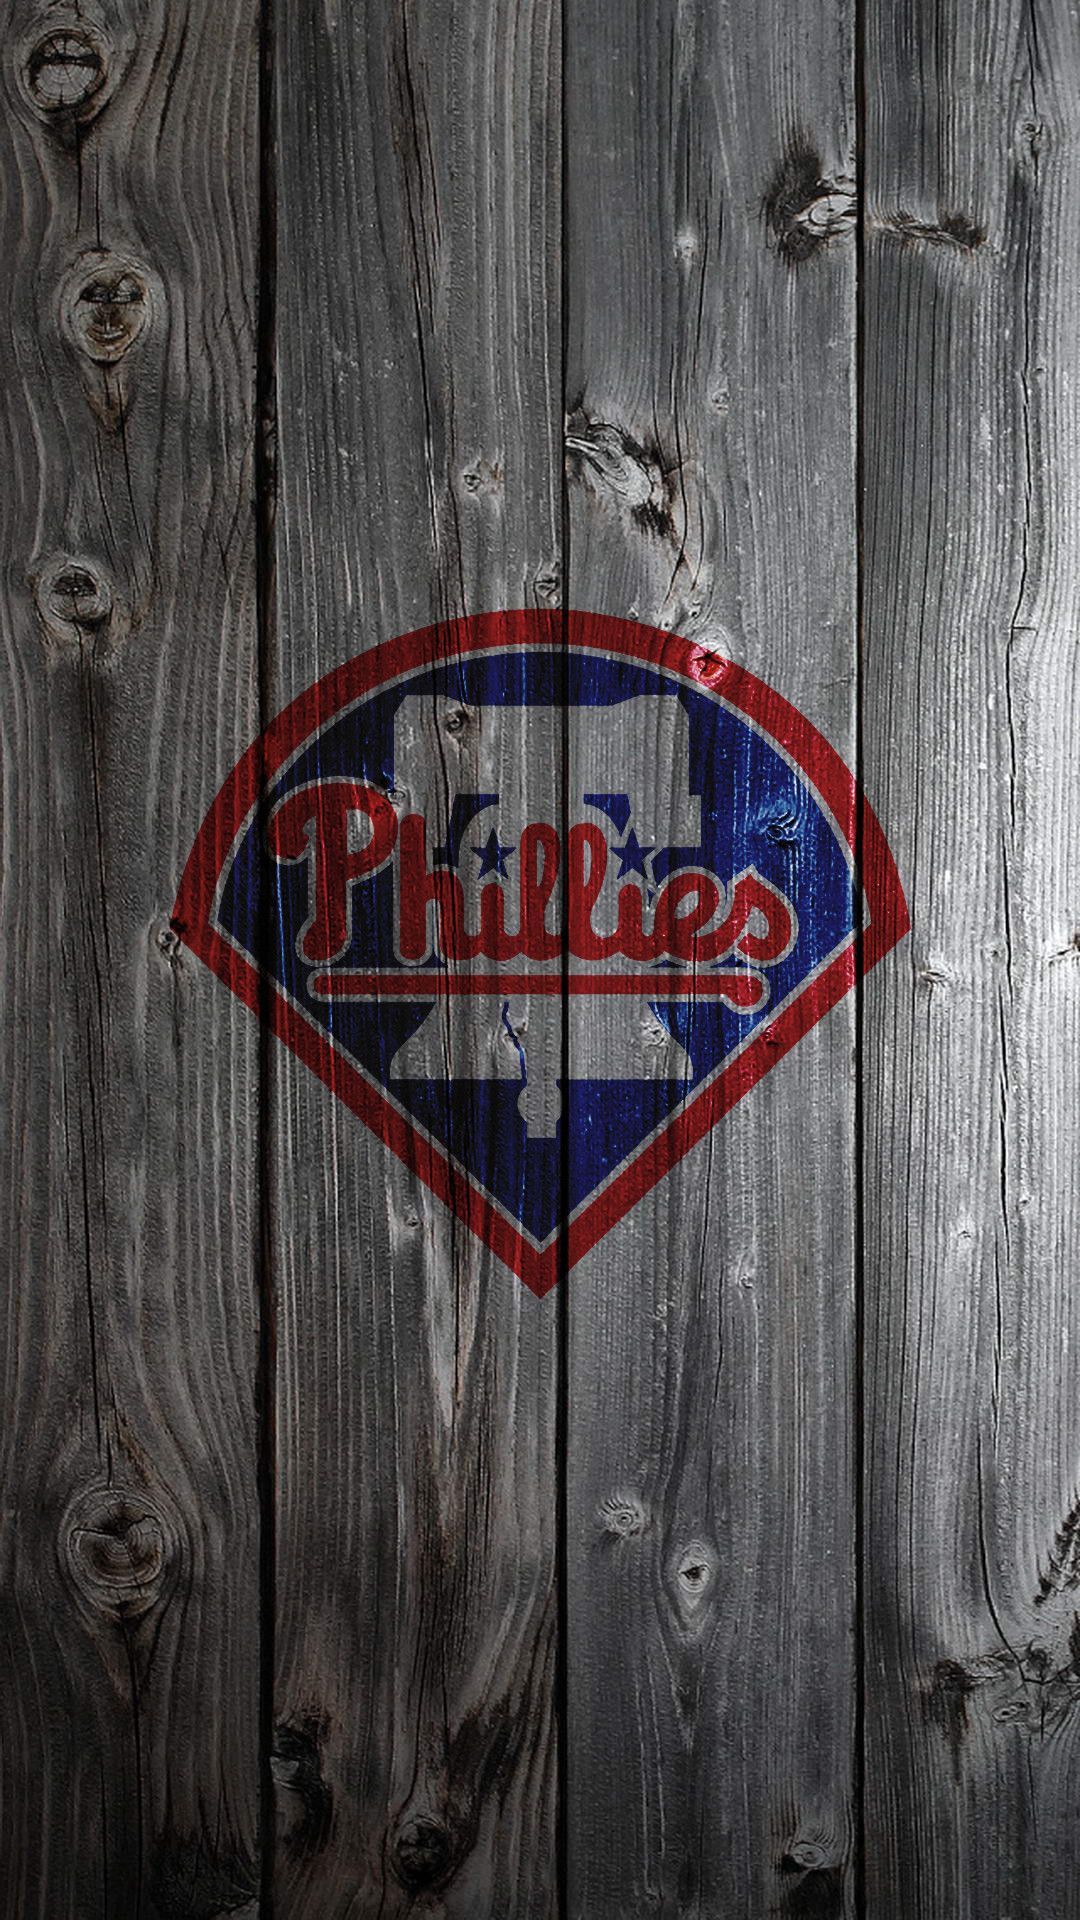 Phillies Phone Wallpapers on WallpaperDog